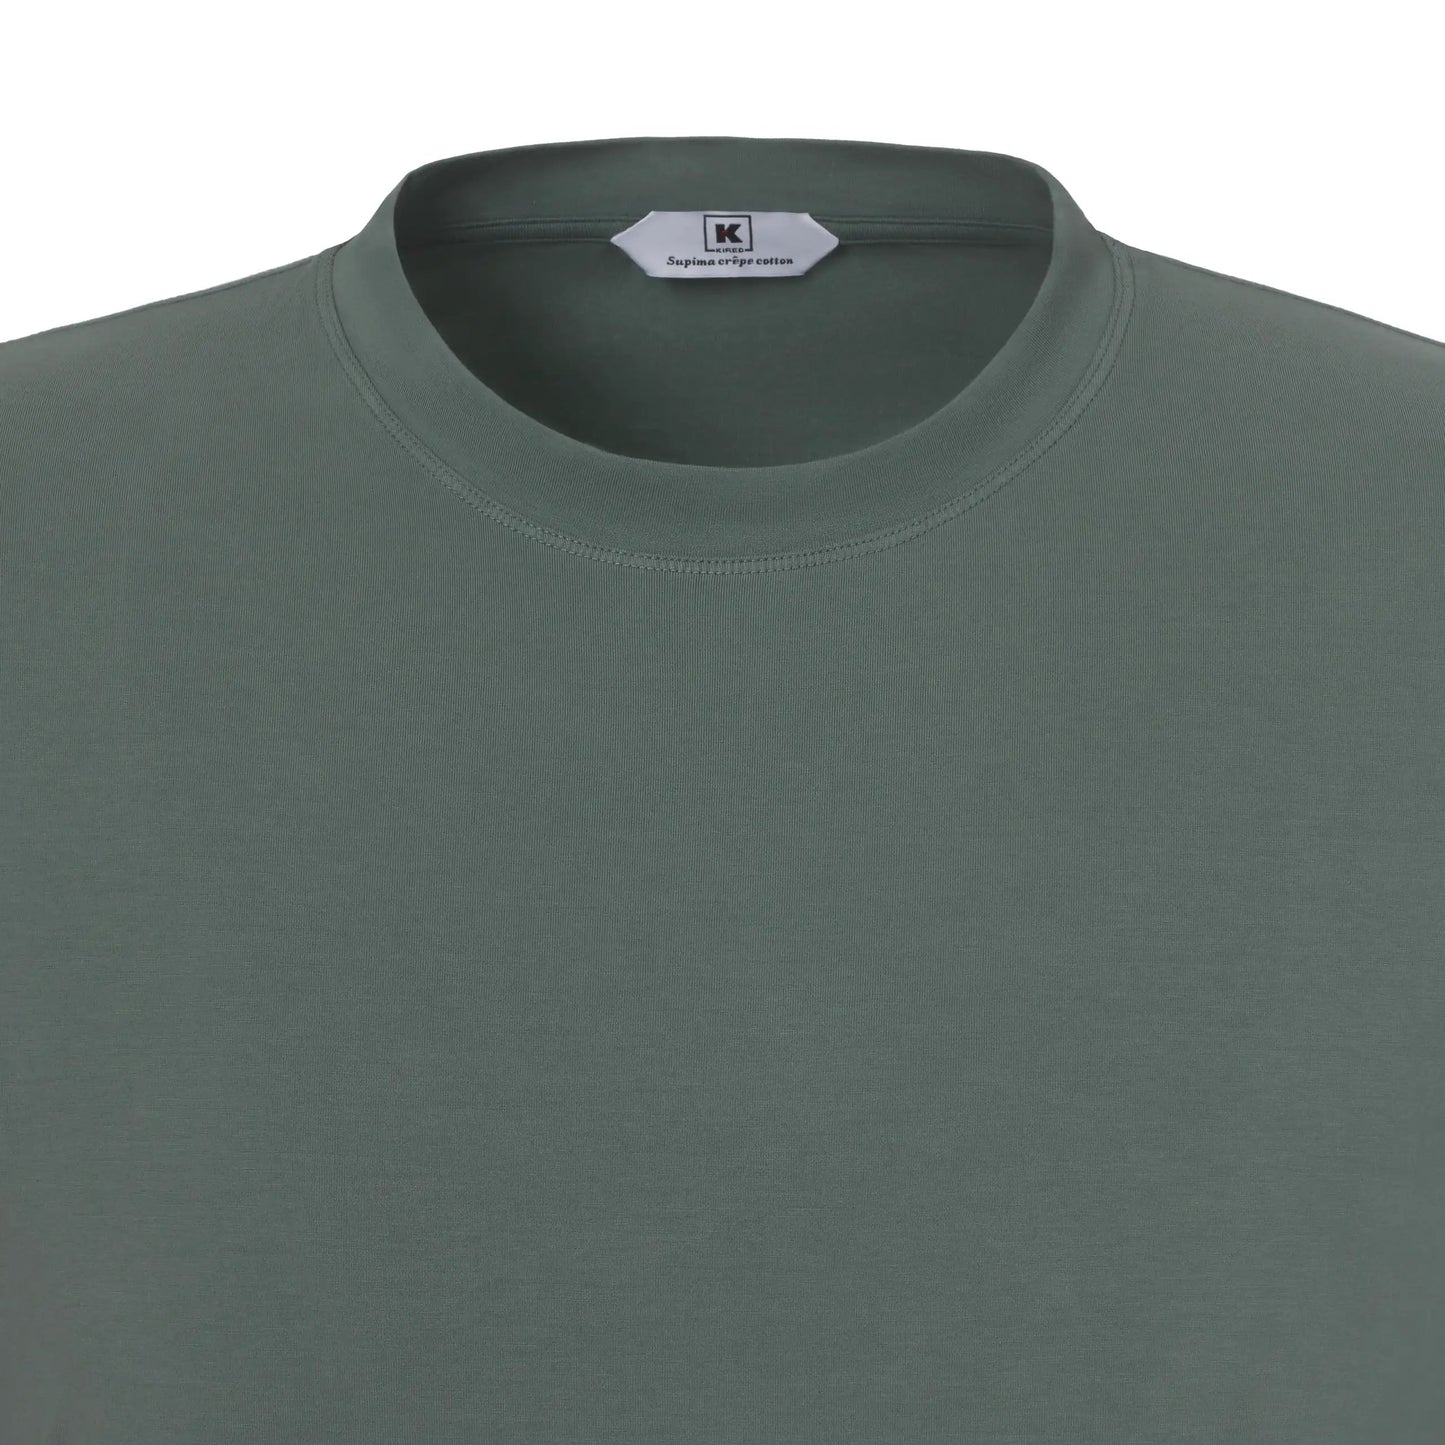 Kired Stretch - Cotton T - Shirt in Military Green - SARTALE